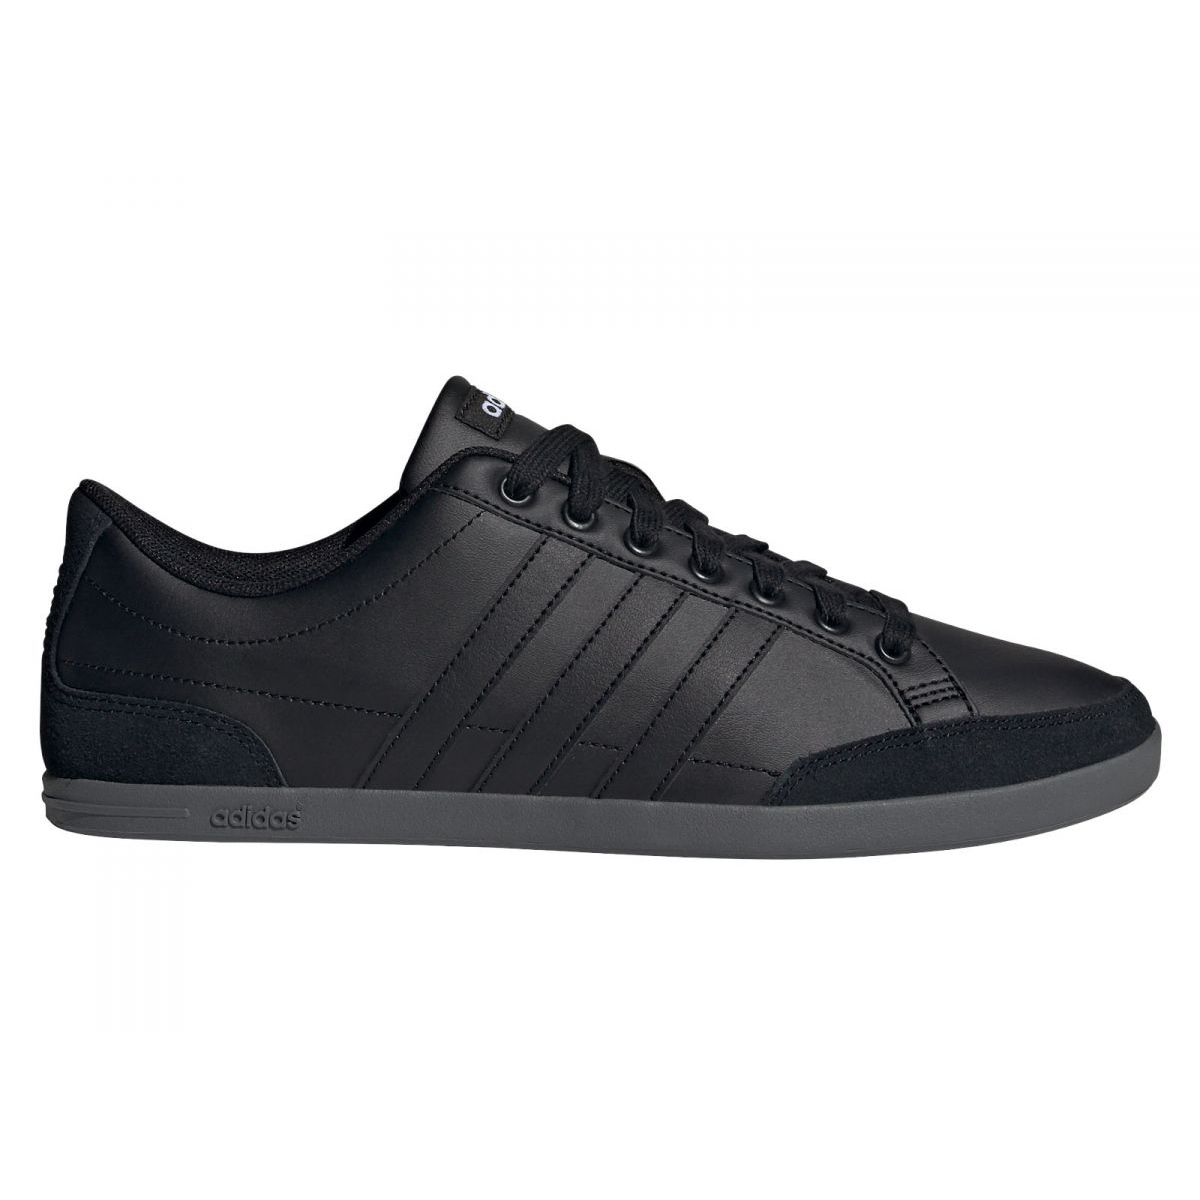 Buty adidas Caflaire M FY8646